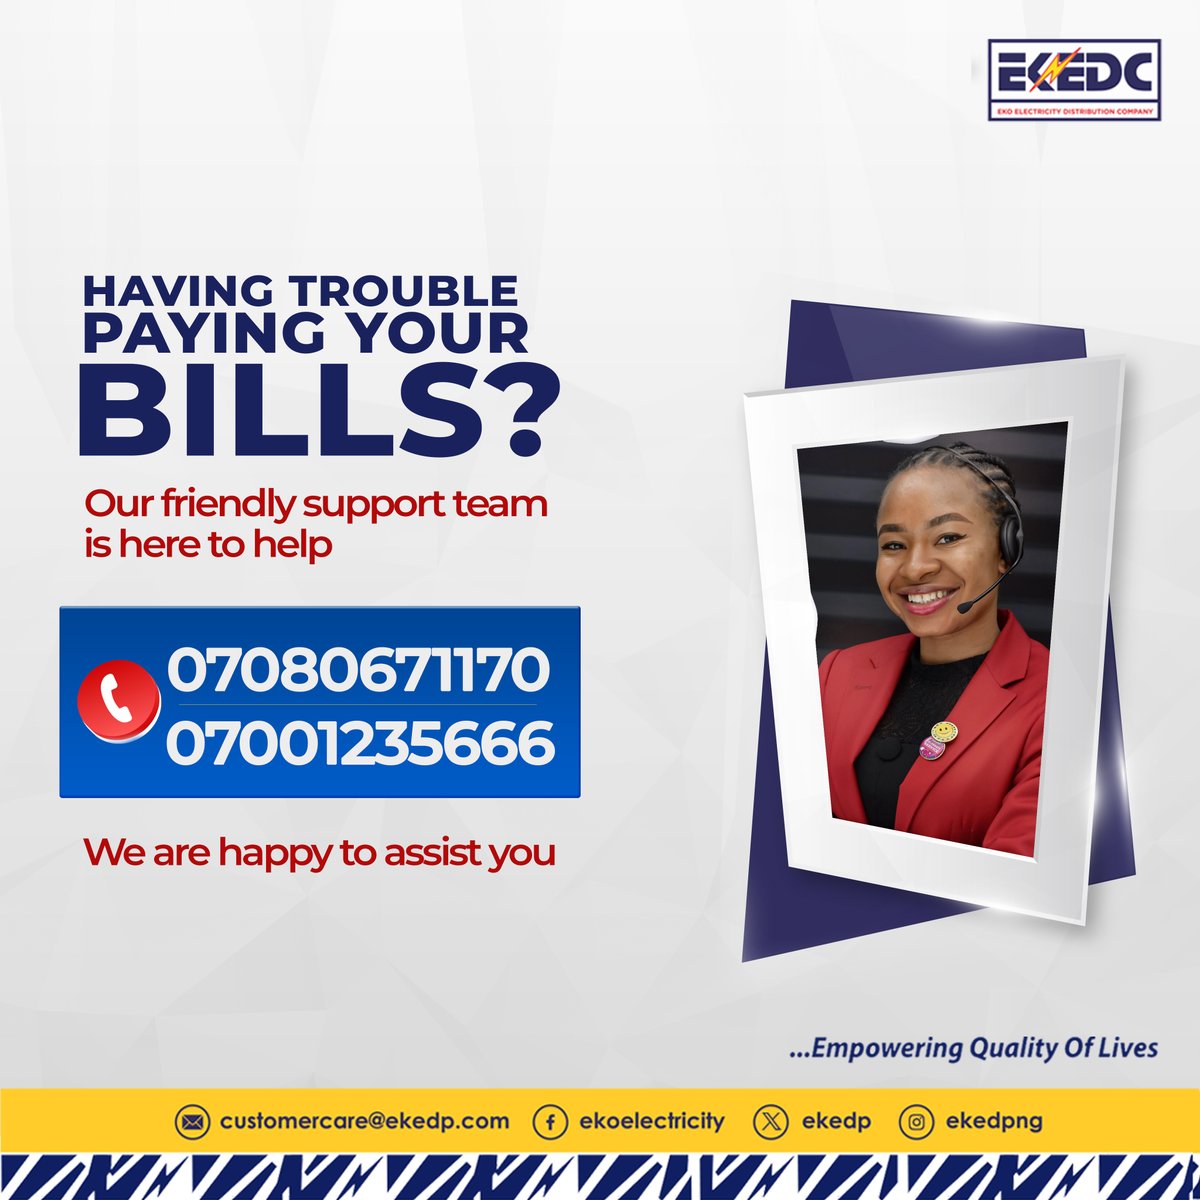 Stuck while paying your bills? Don't sweat! Our friendly support team is here to help. Call 07080671170 or 07001235666, or send us a DM on our socials! ⚡️ #EKEDC #Empoweringthequalityoflives #BillPayment